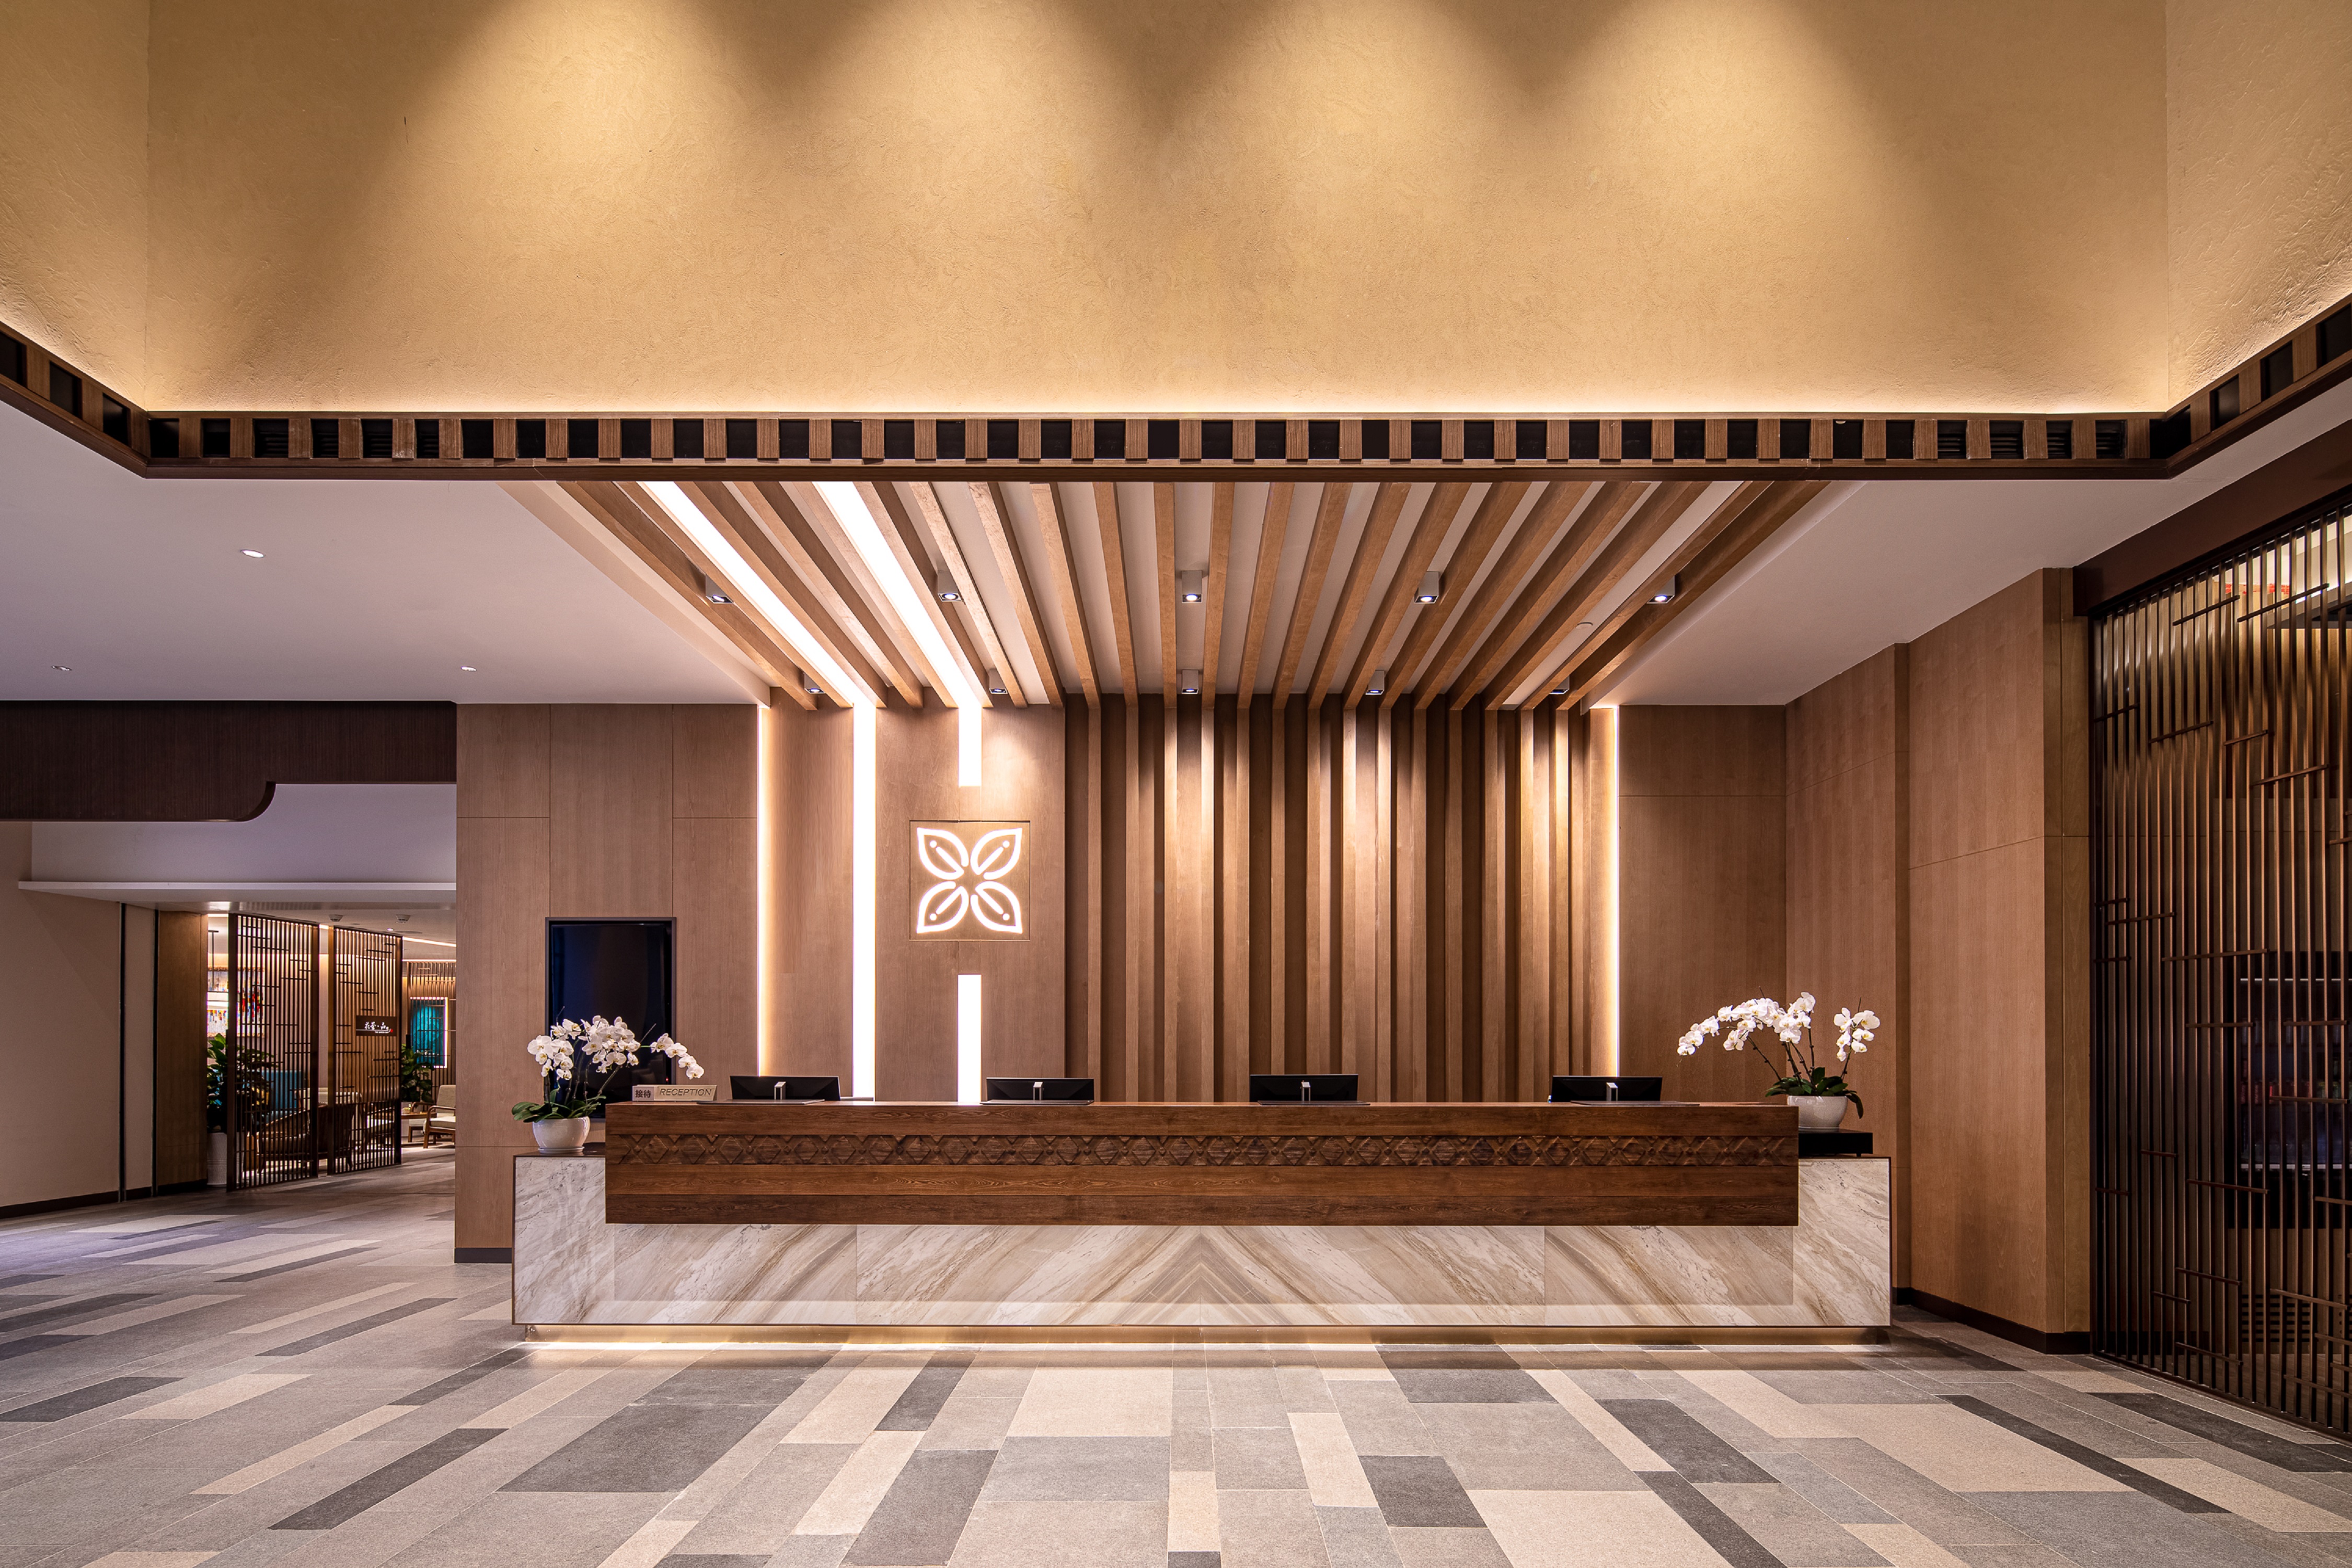 Front desk area in lobby